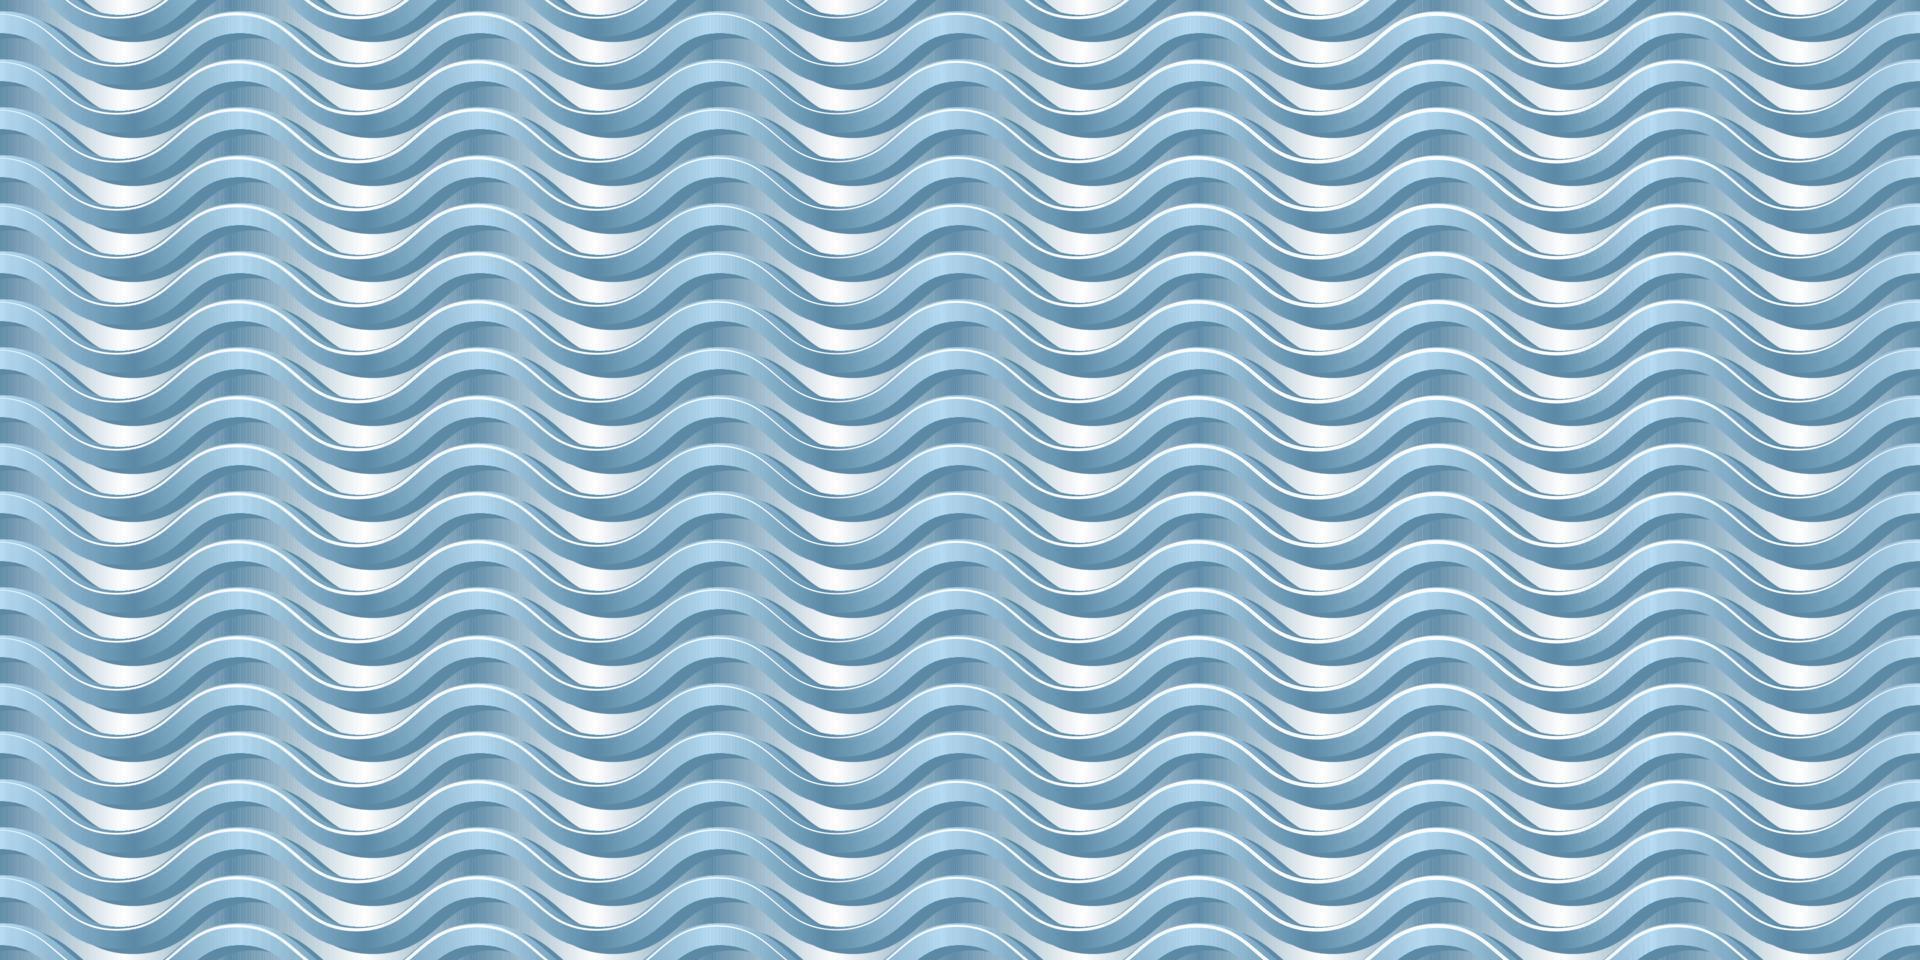 Abstract 3d background. Blue waves seamless pattern. Vector illustration.